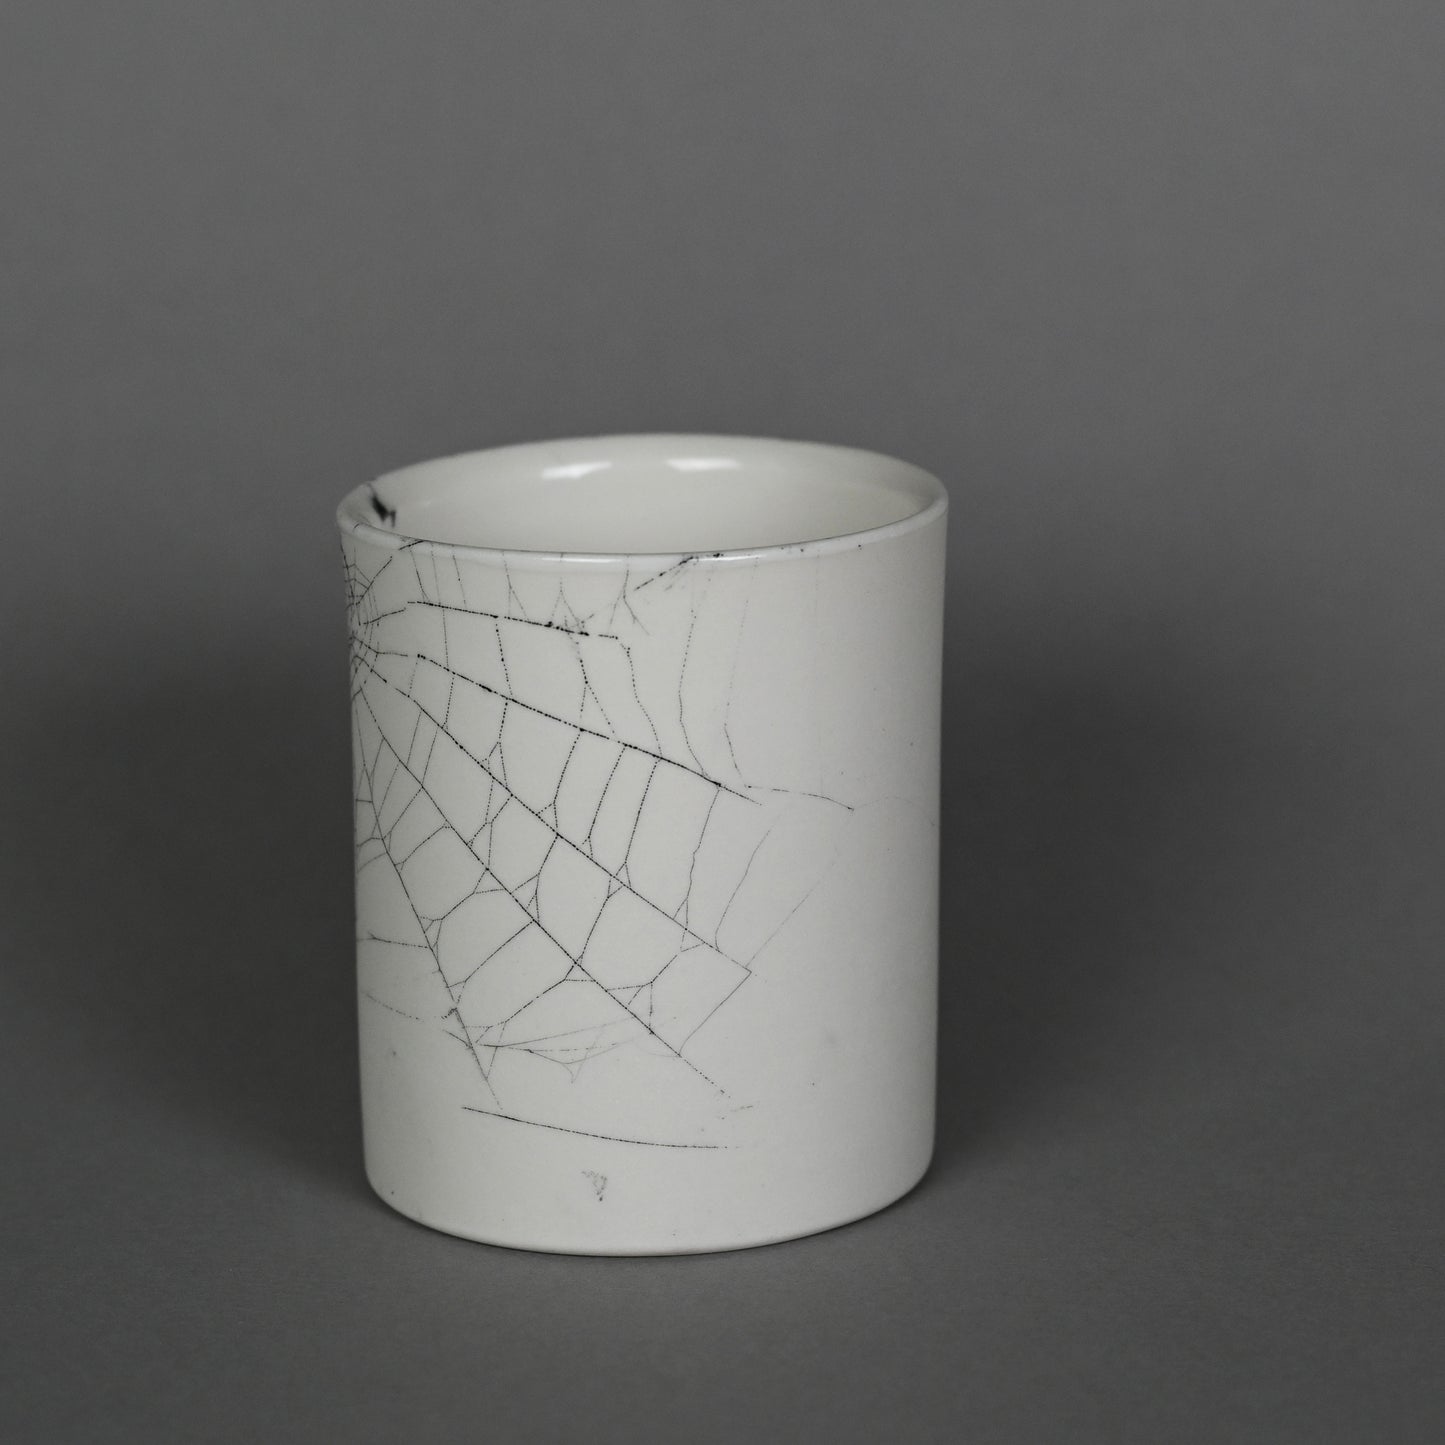 Web on Clay (210), Collected September 24, 2022